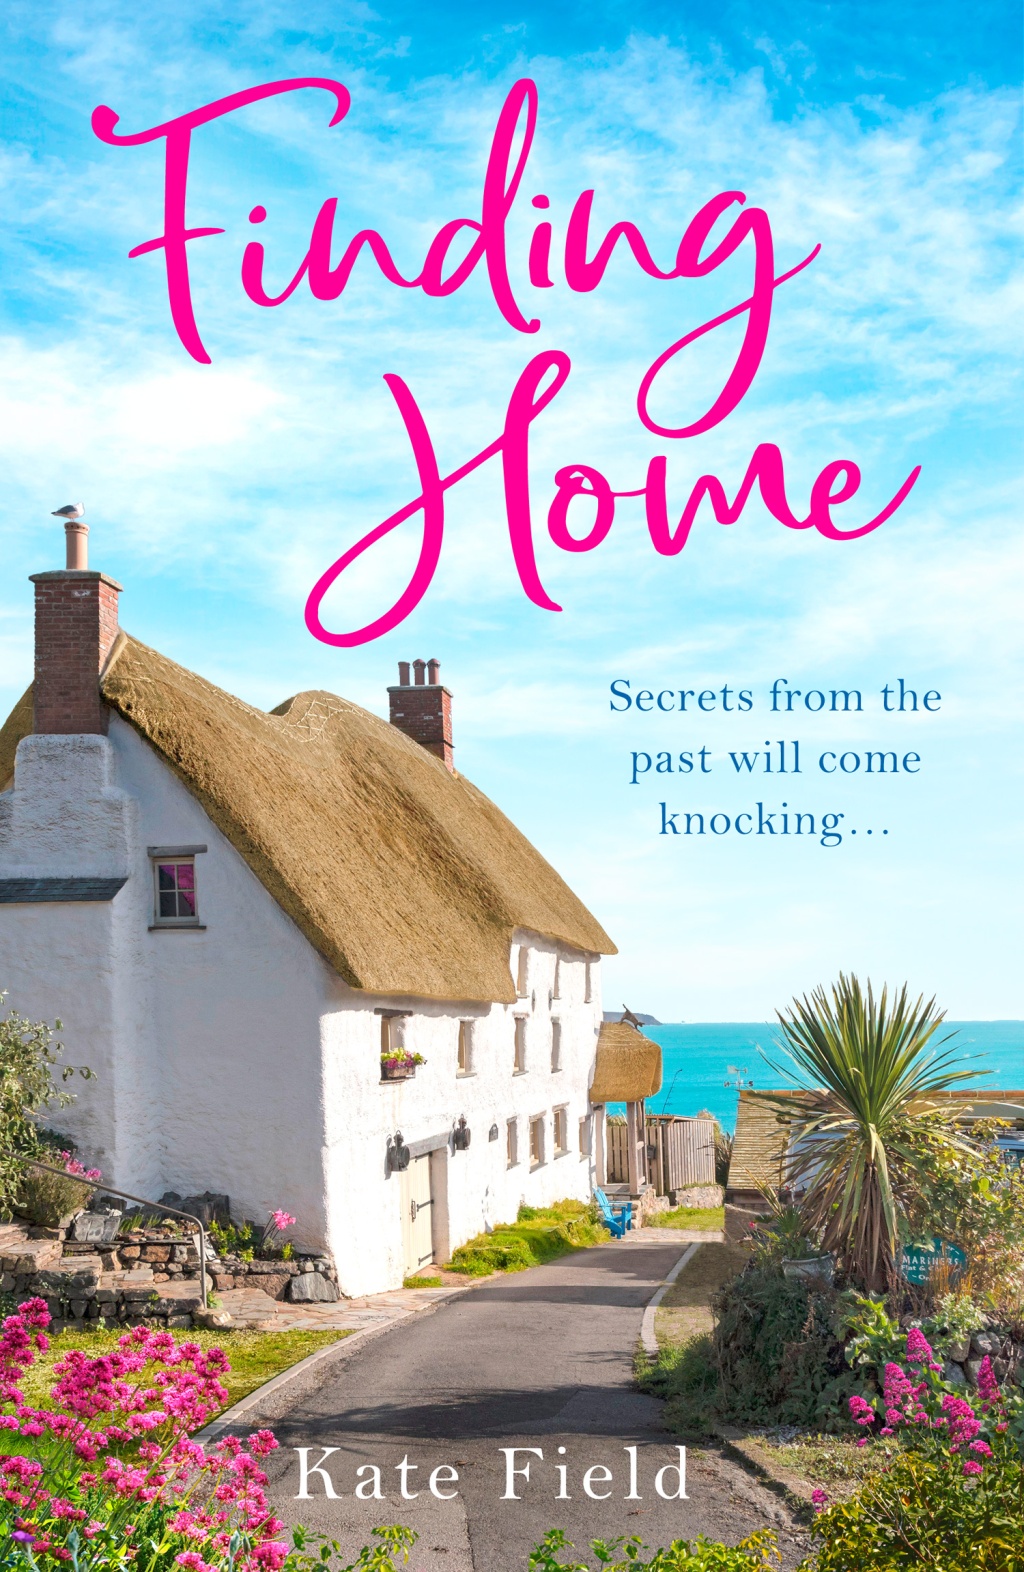 Good to meet you…Kate Field, author of Finding Home